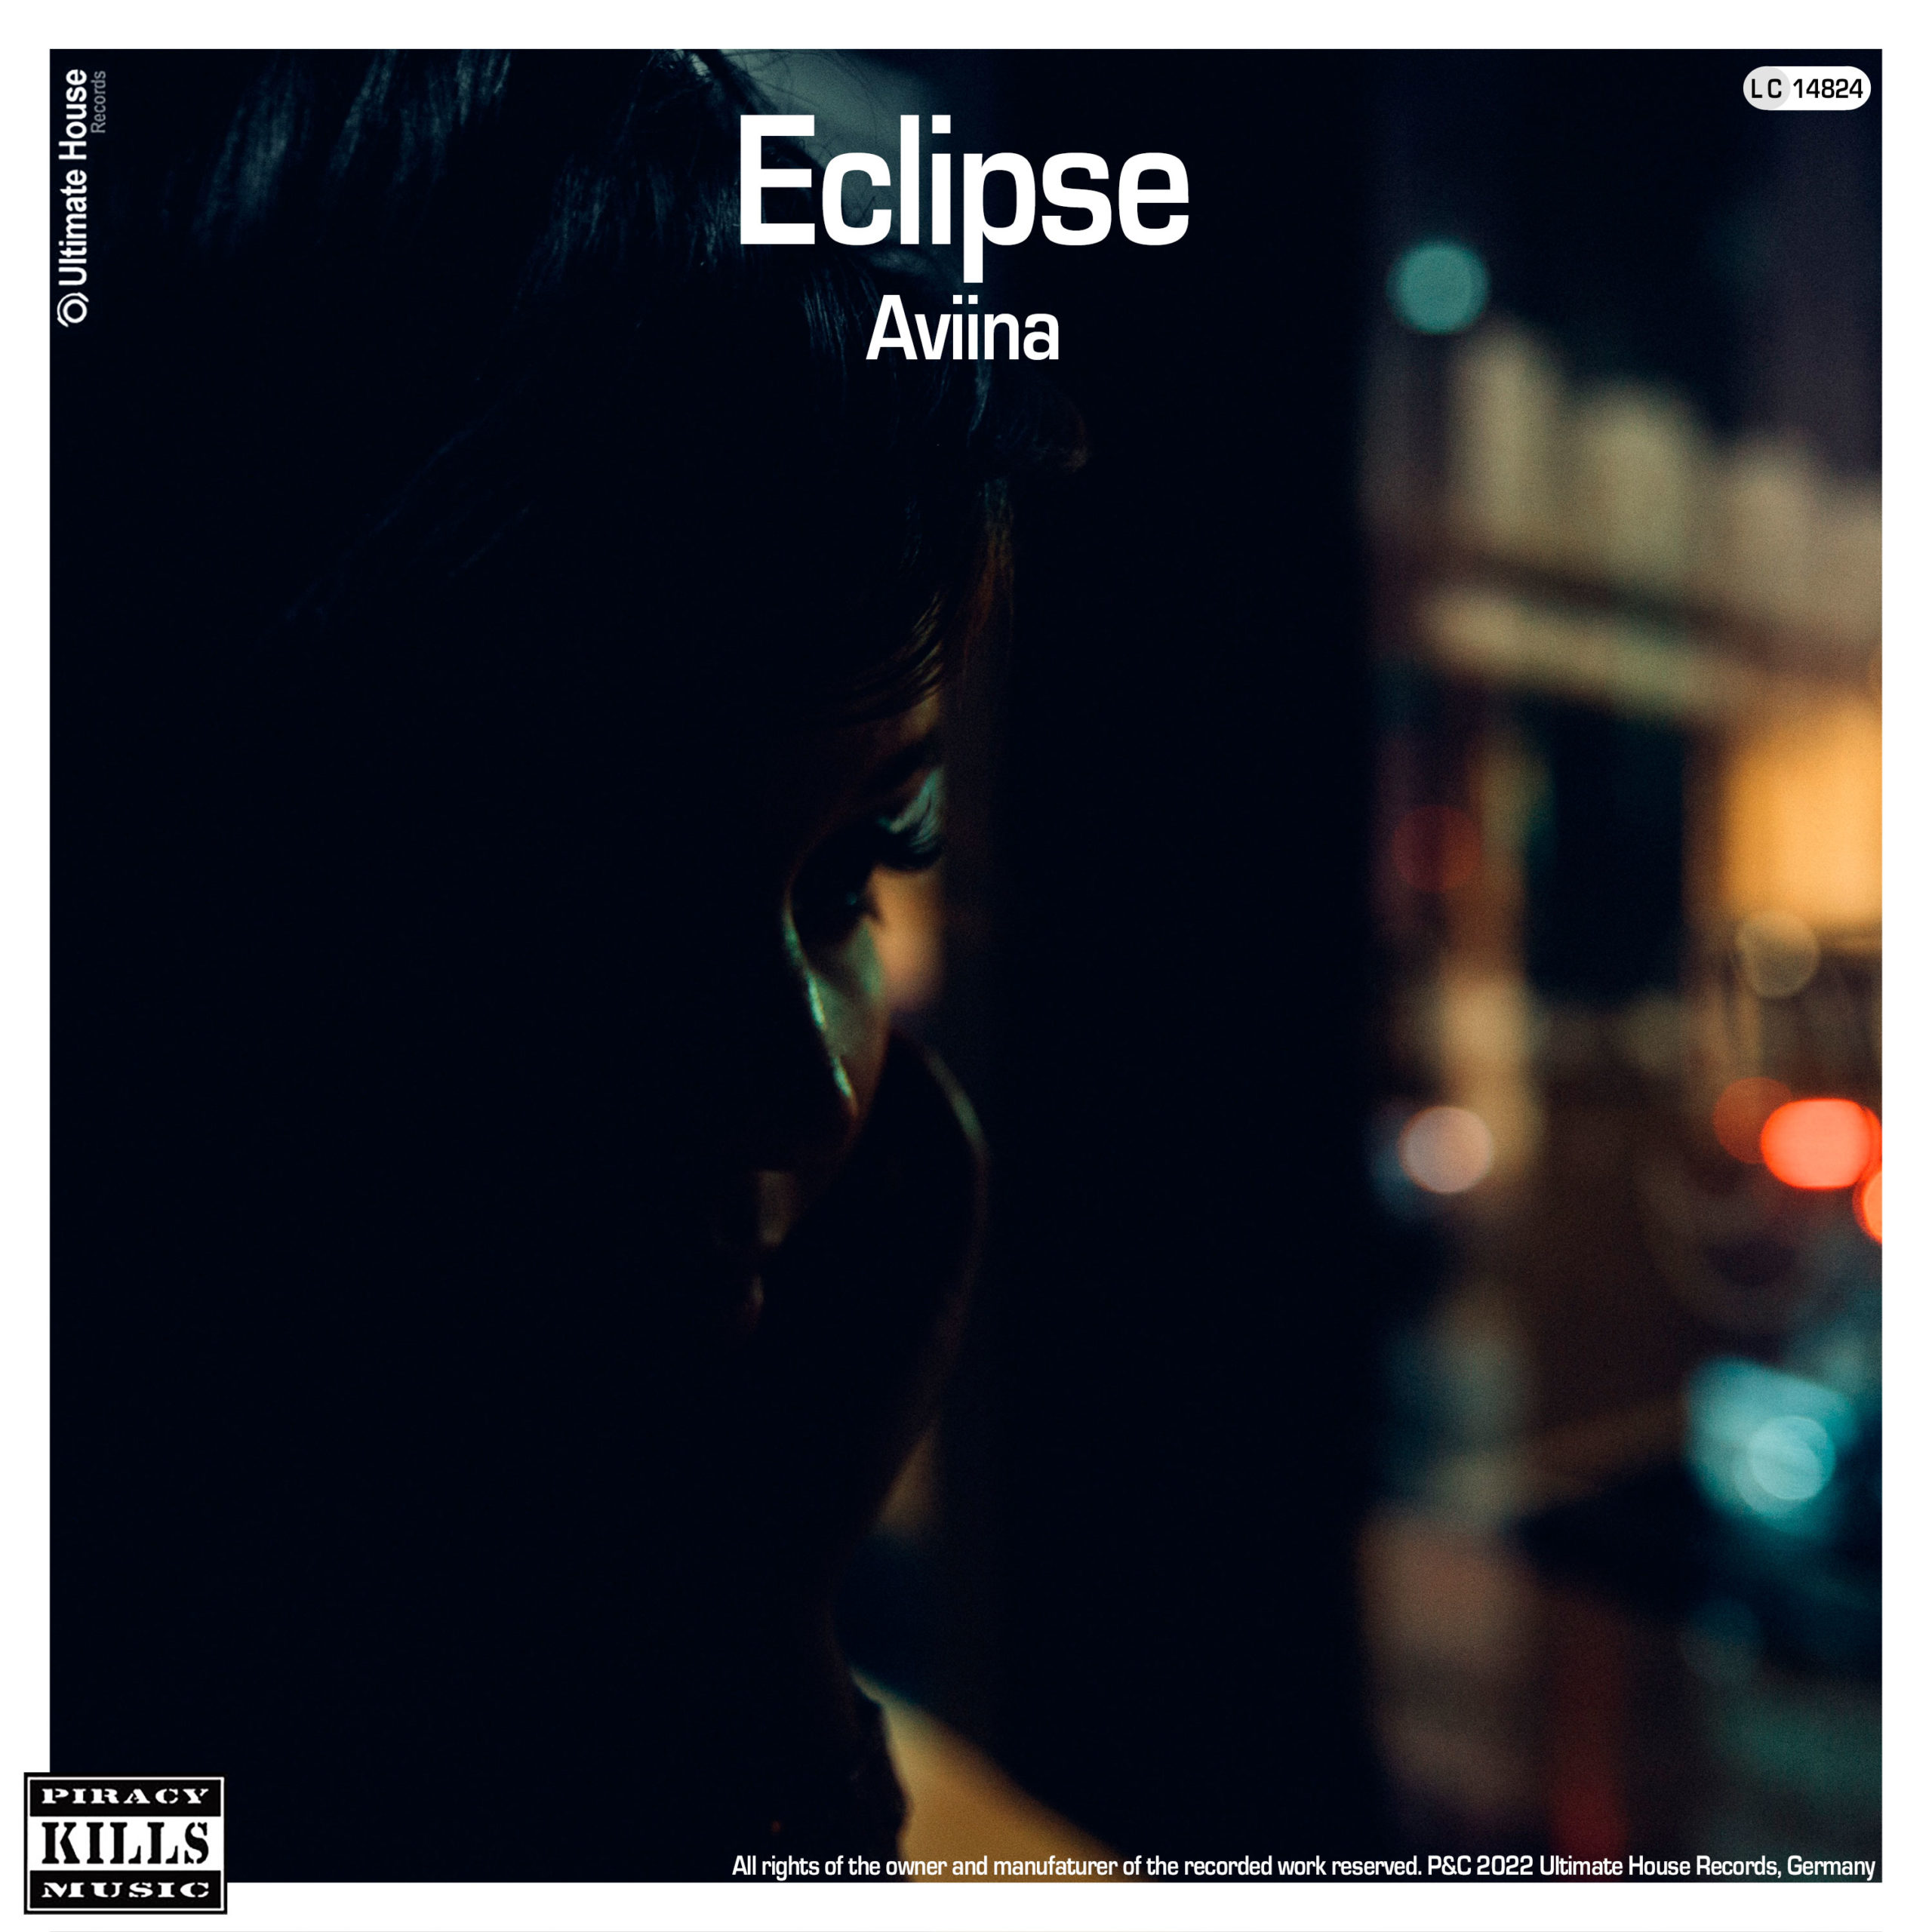 https://www.ultimate-house-records.com/wp-content/uploads/2022/12/167-Aviina-Eclispe-Cover_3000px_web-scaled.jpg